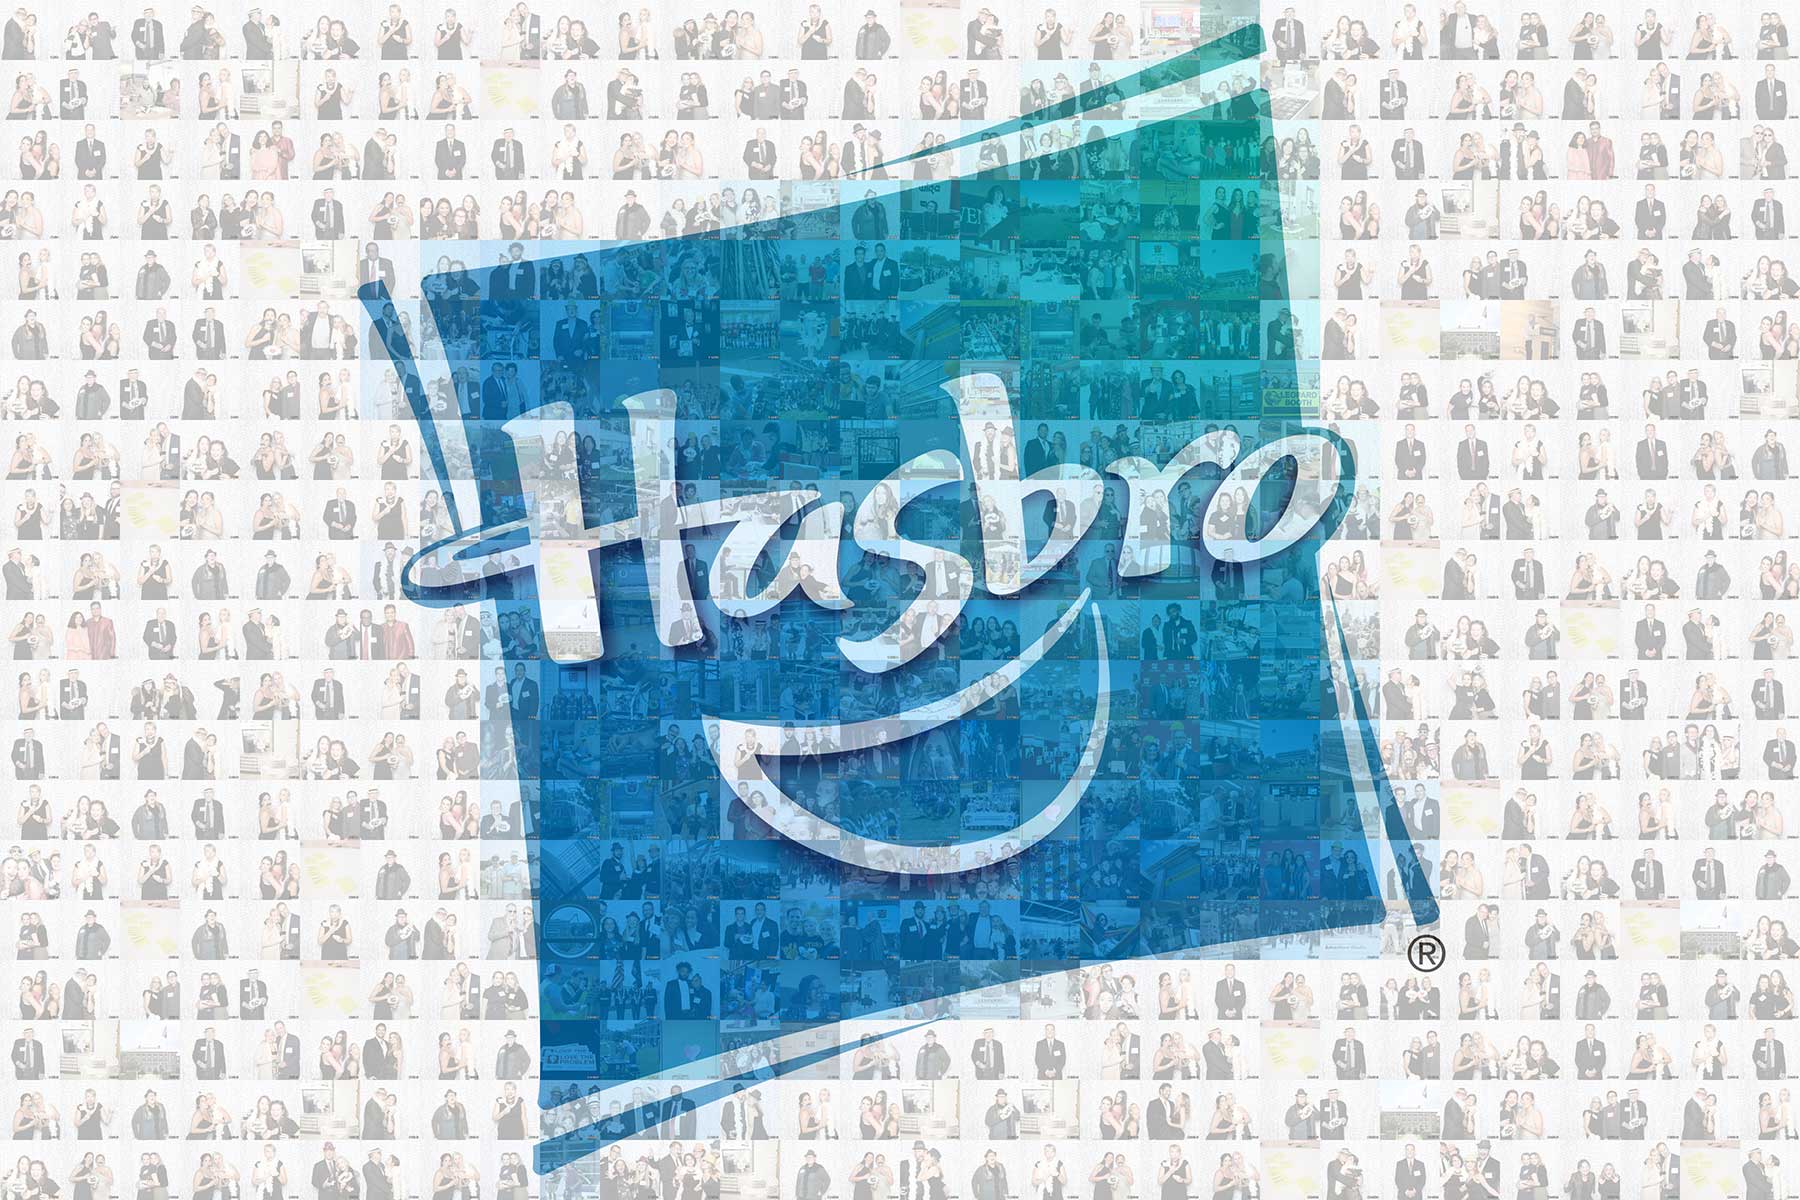 Hasbro logo used to create a mosaic wall photo at a live event